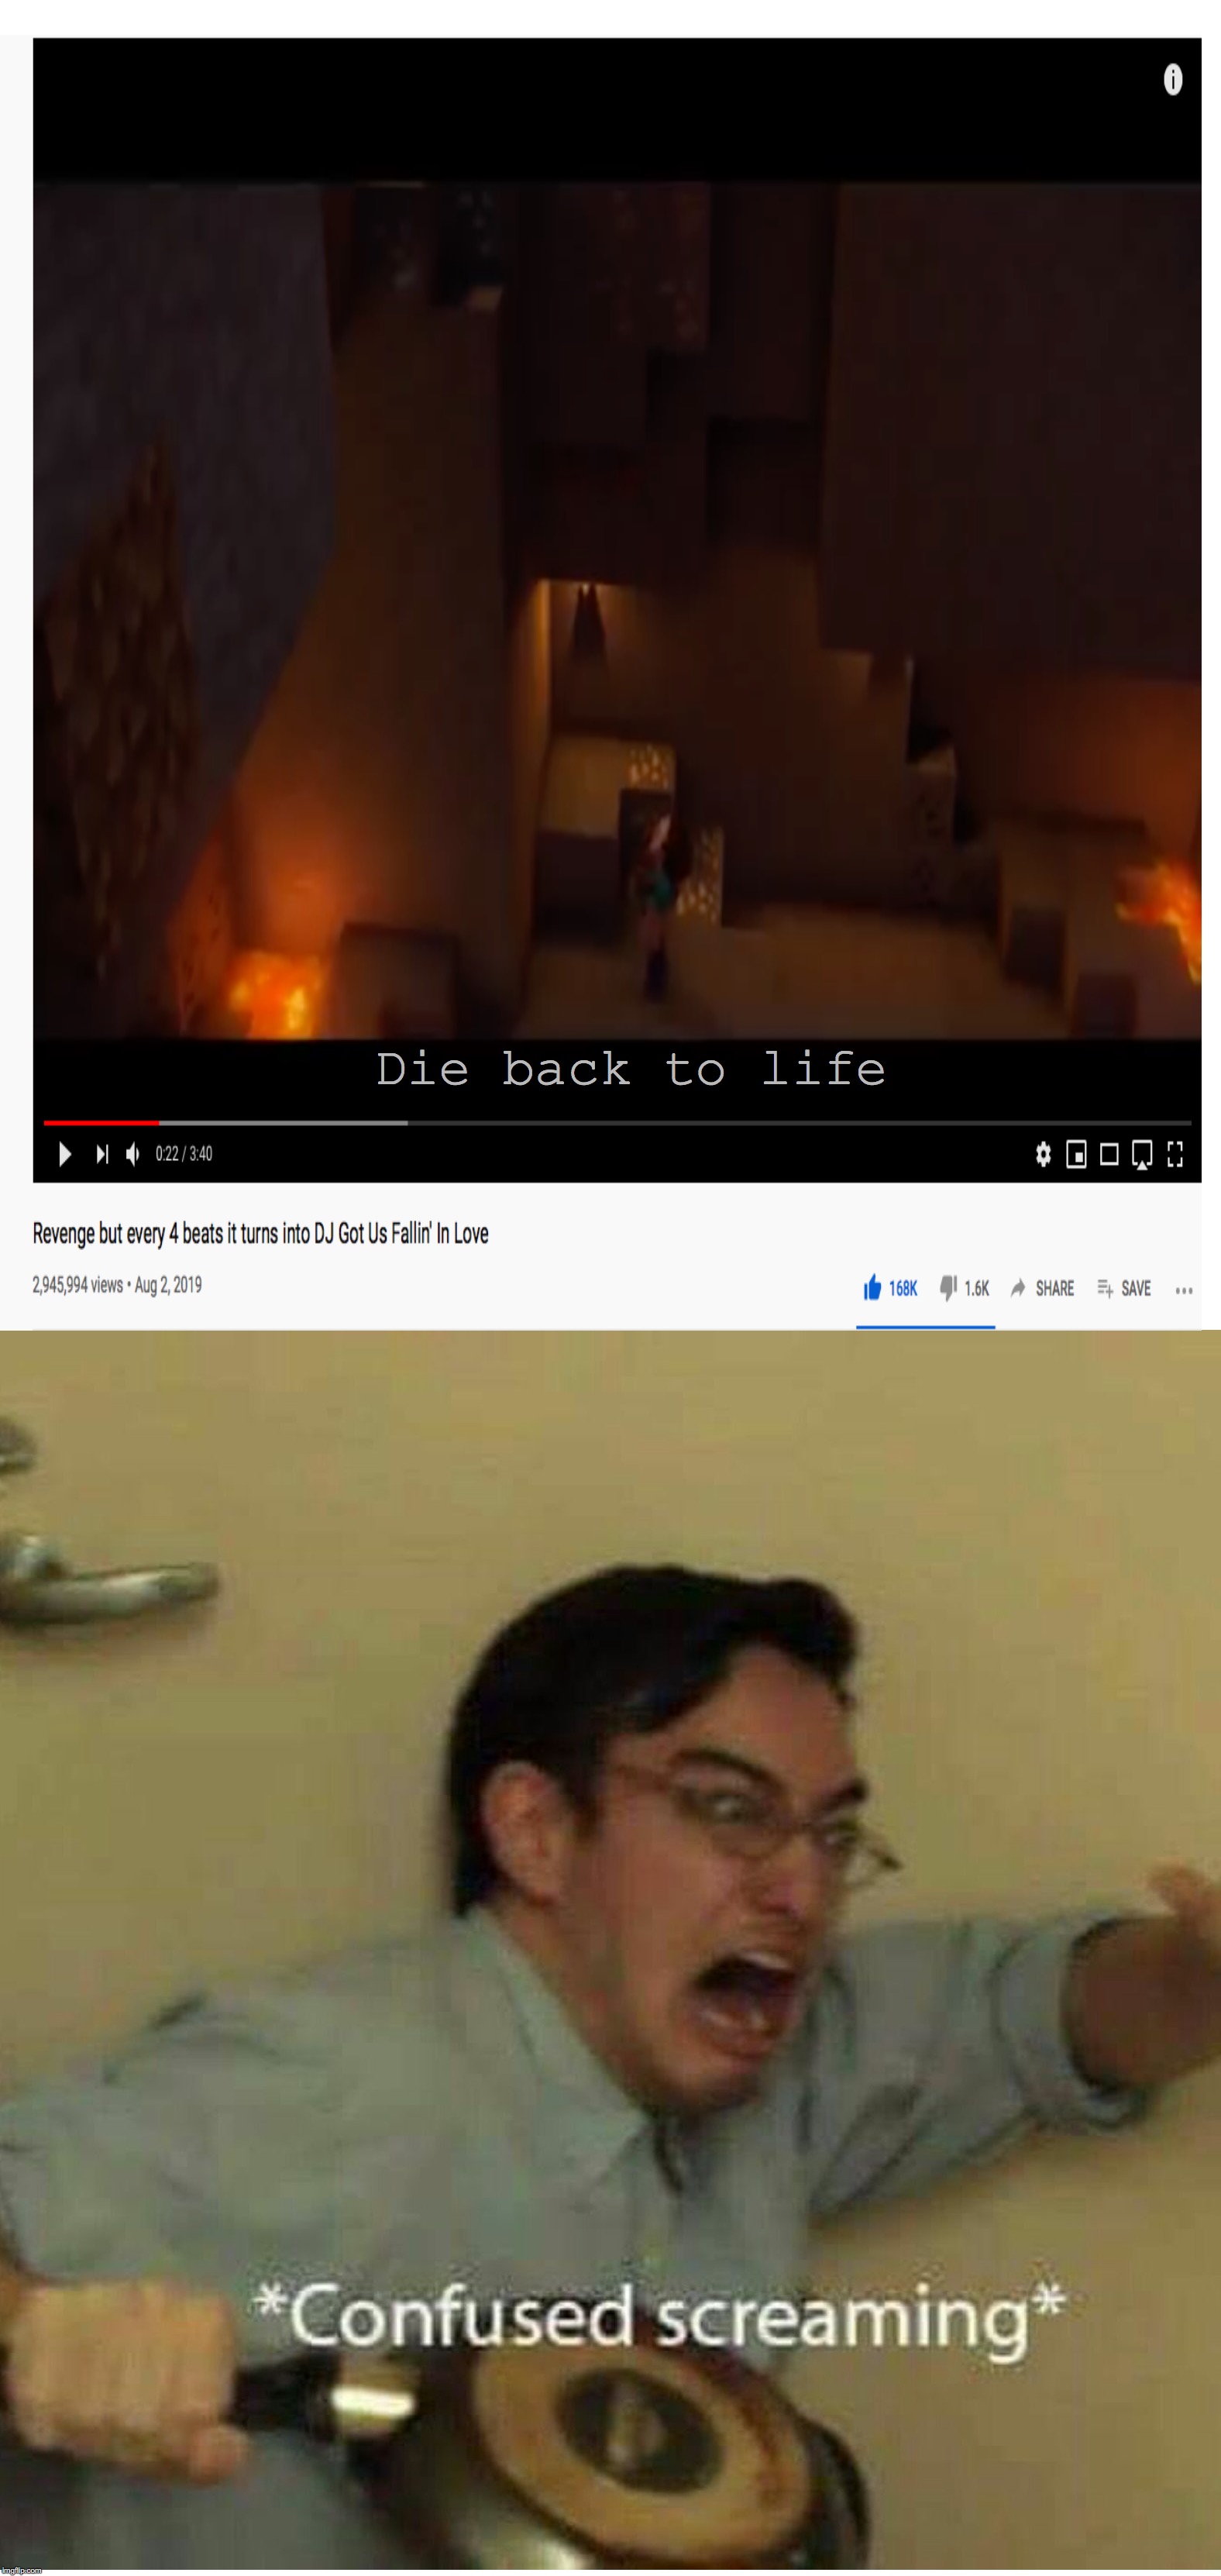 Die back to life | image tagged in confused screaming | made w/ Imgflip meme maker